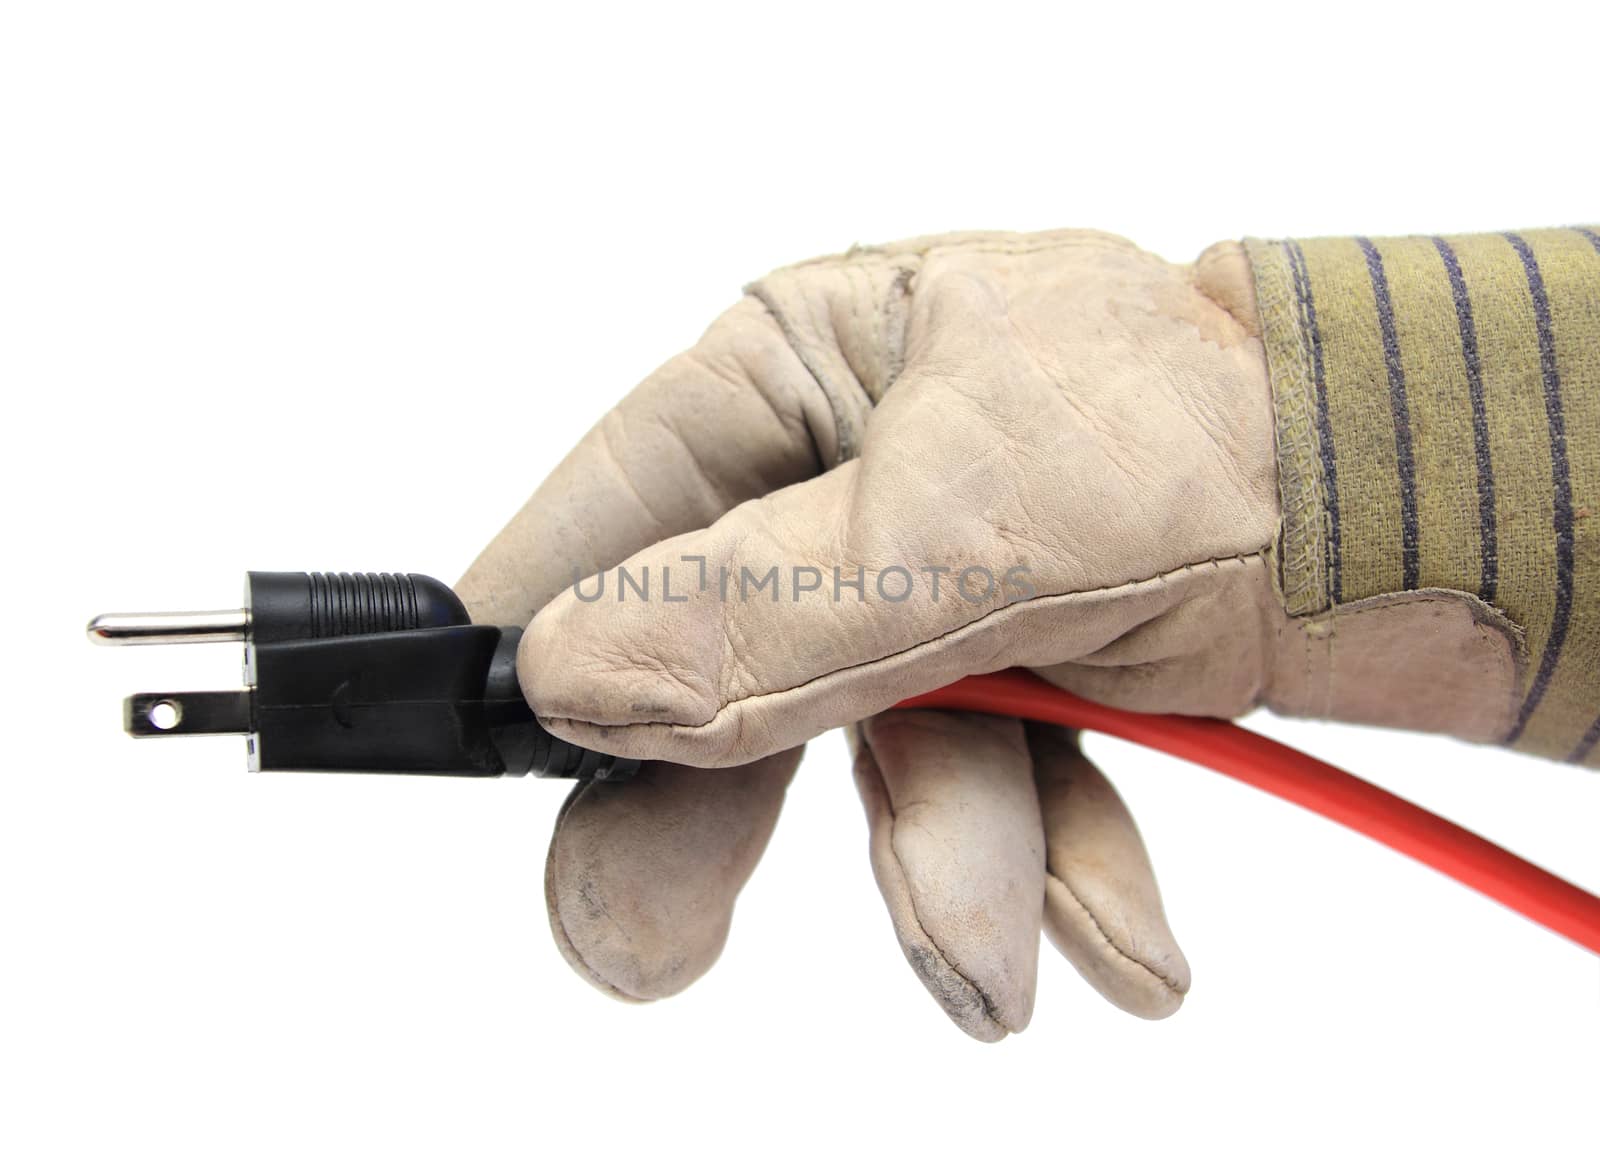 closeup of a hand with glove holding an electric wire